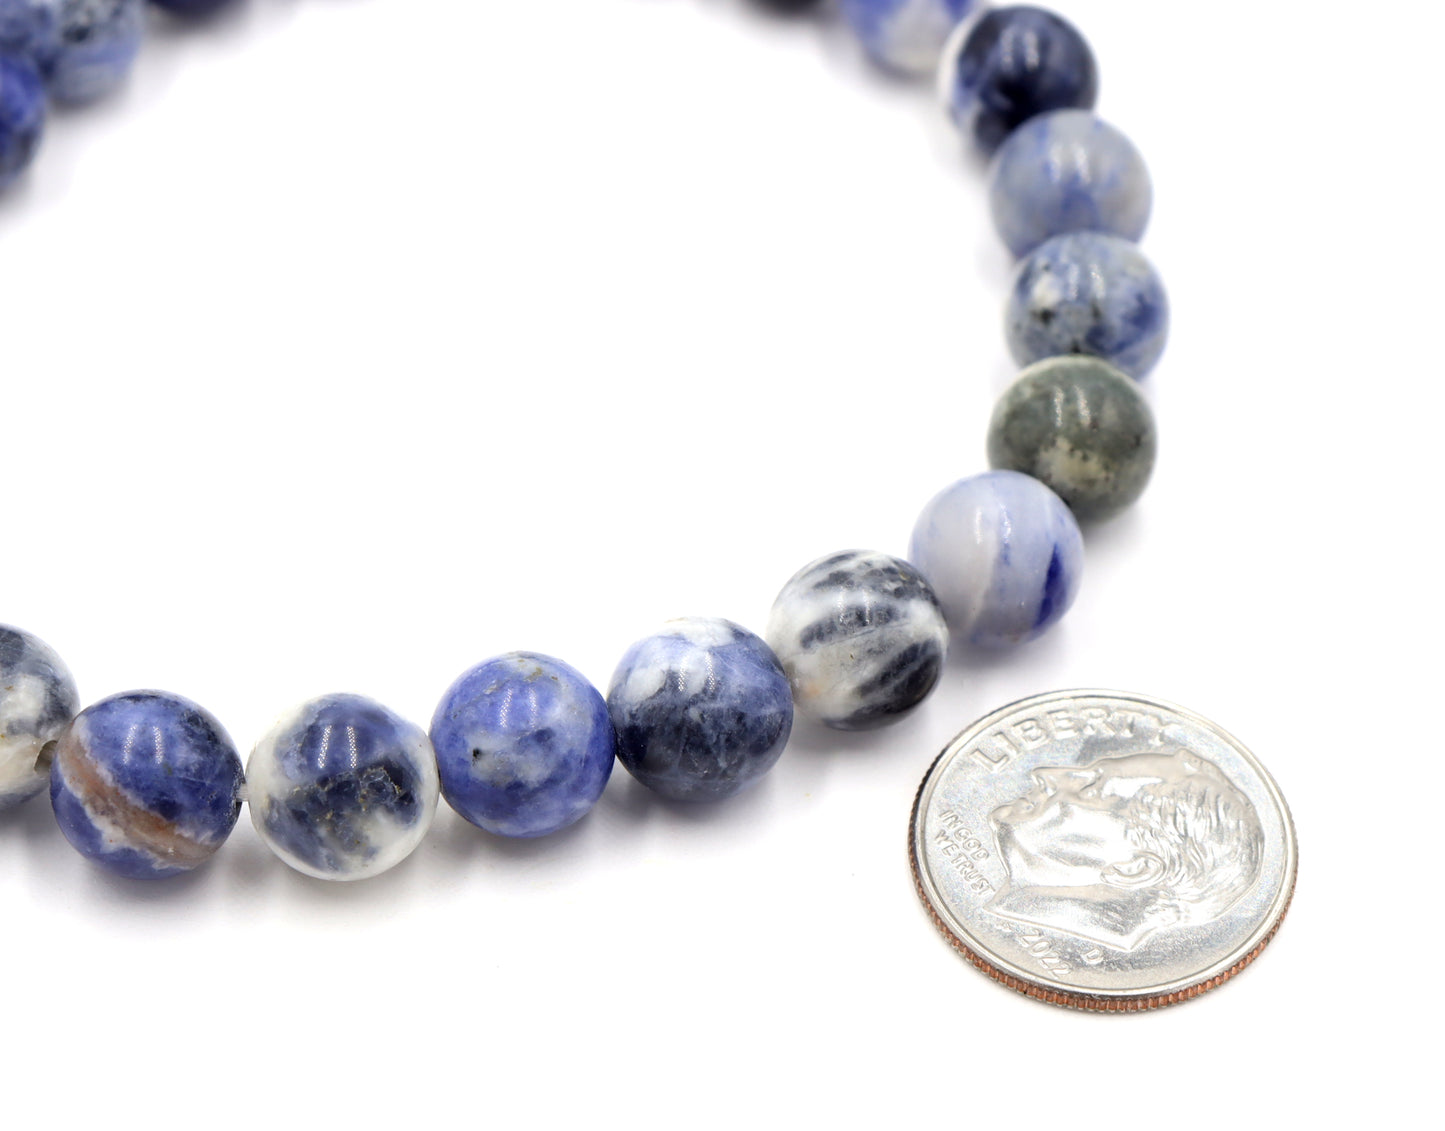 Showing Up to Show Off Our Sodalite Gemstone 8.5mm Bracelet by Monkeys Mojo